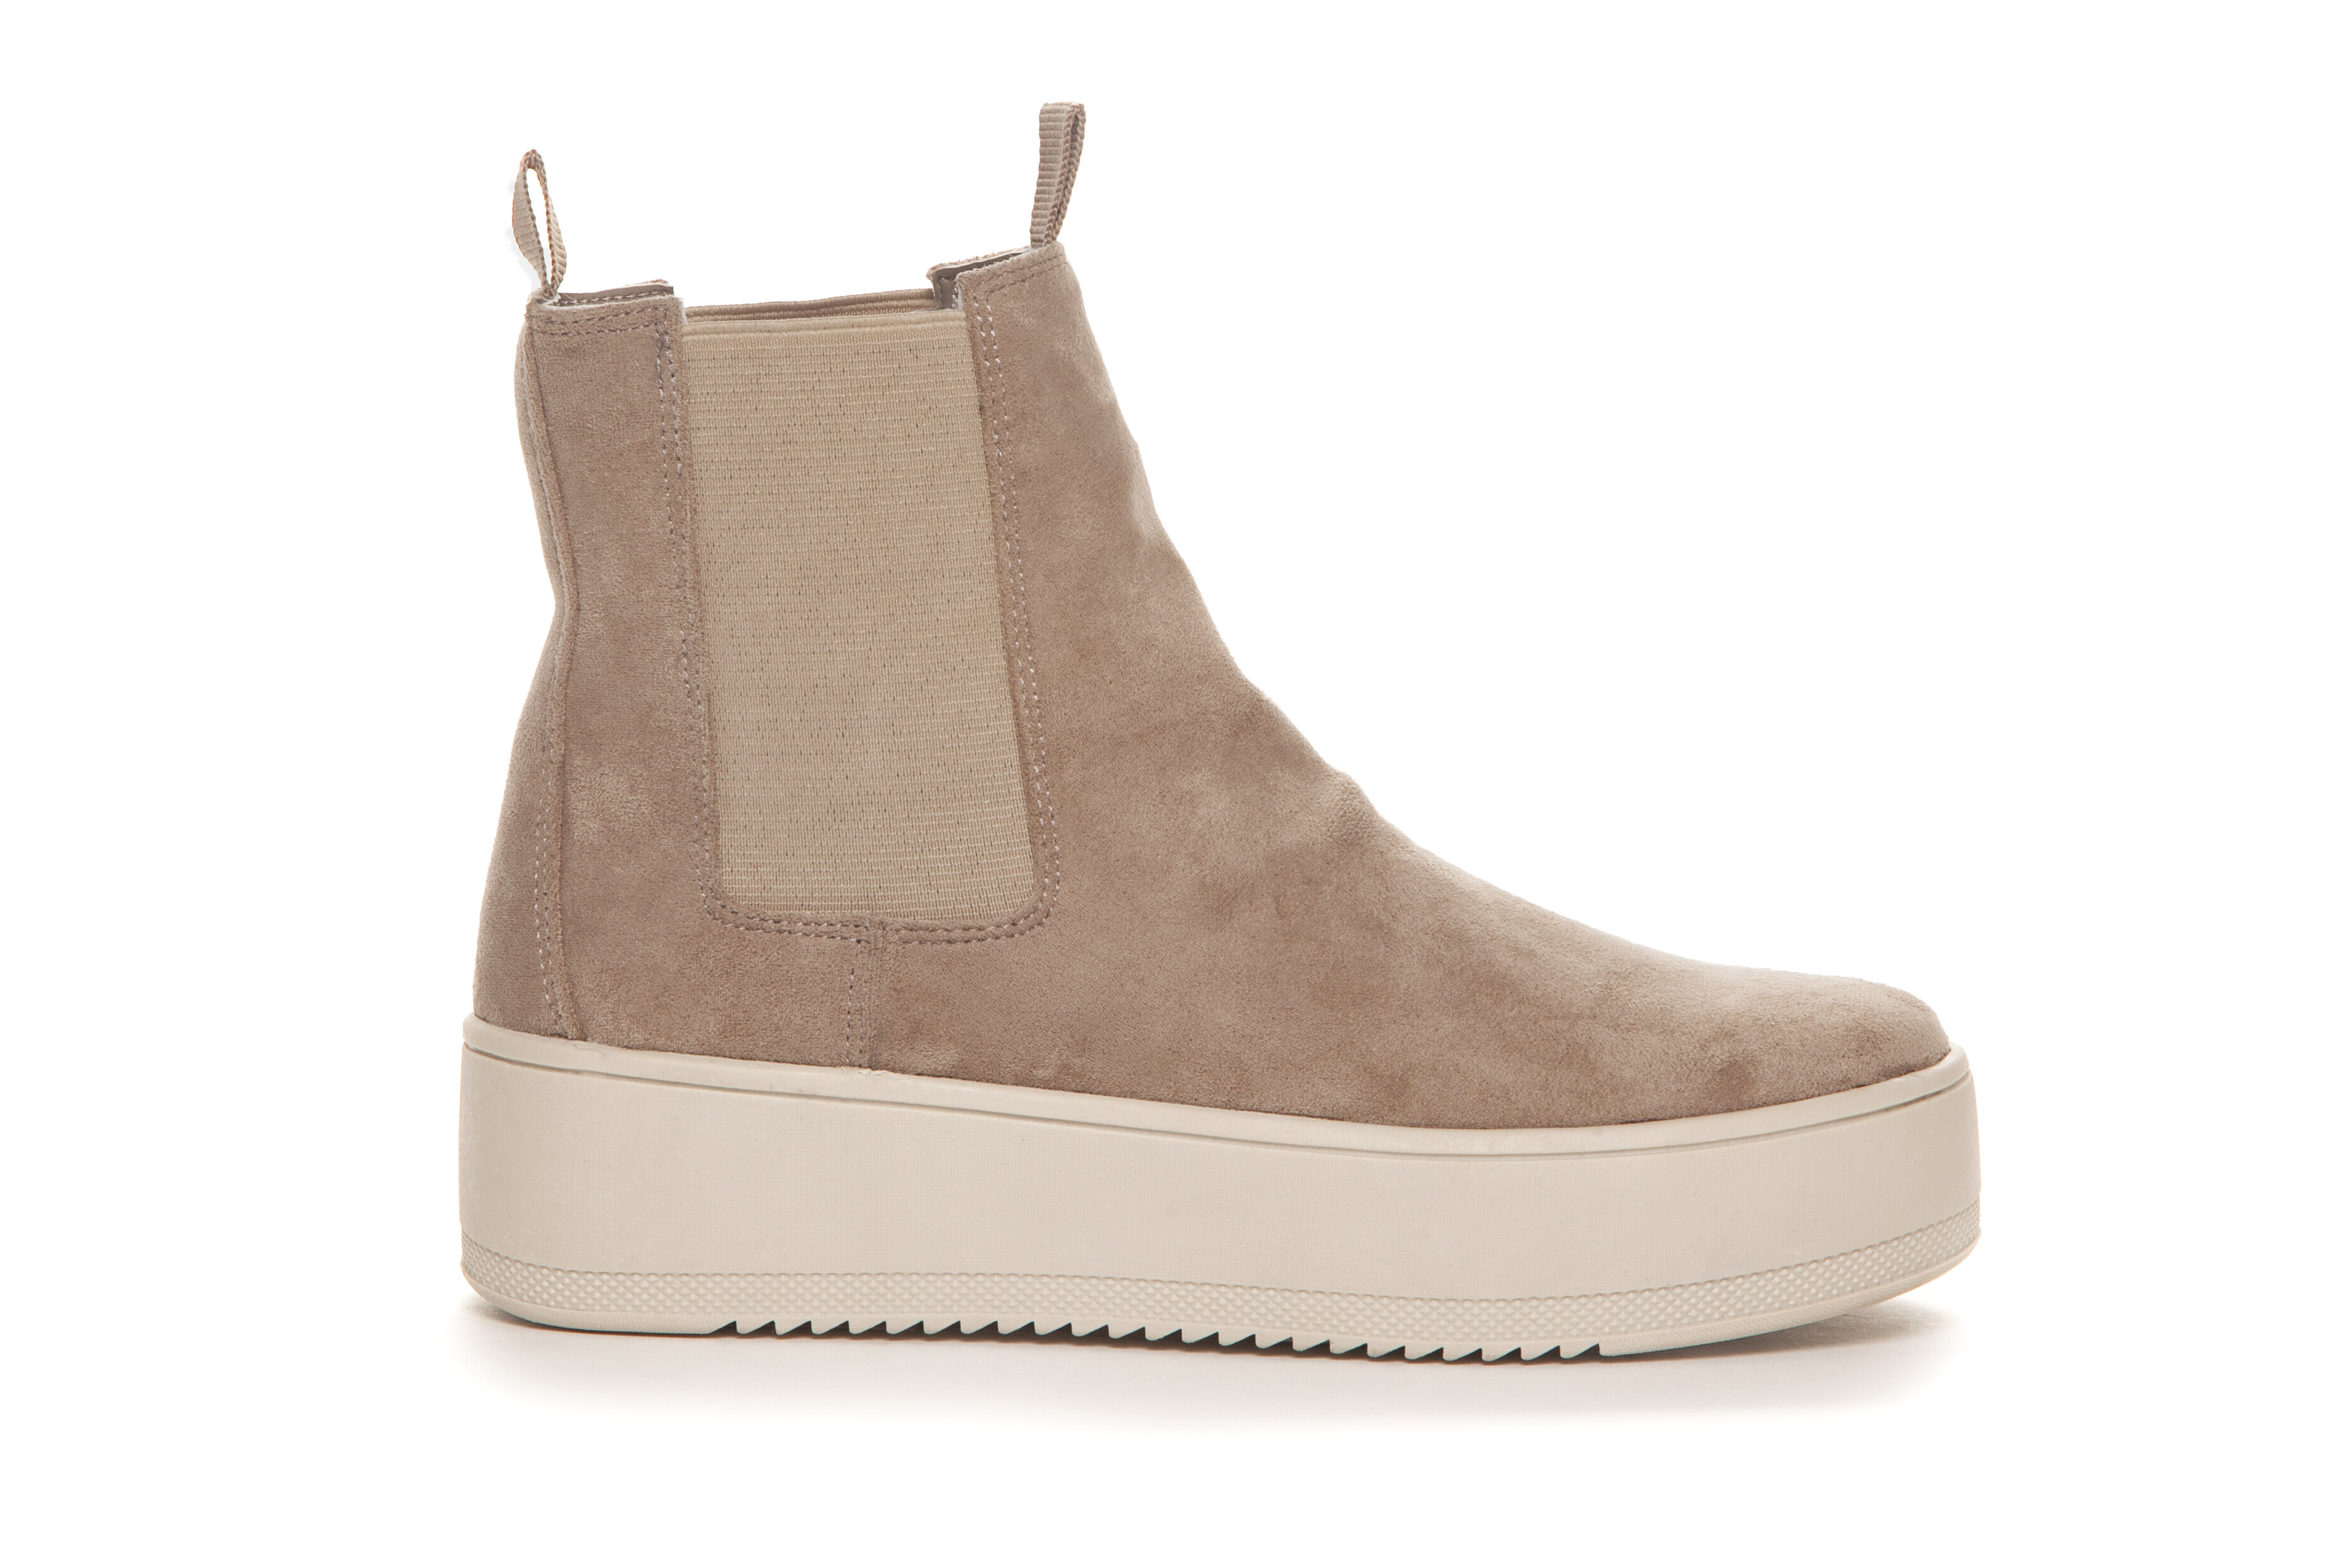 Ankle boots in suede imitation - Beige